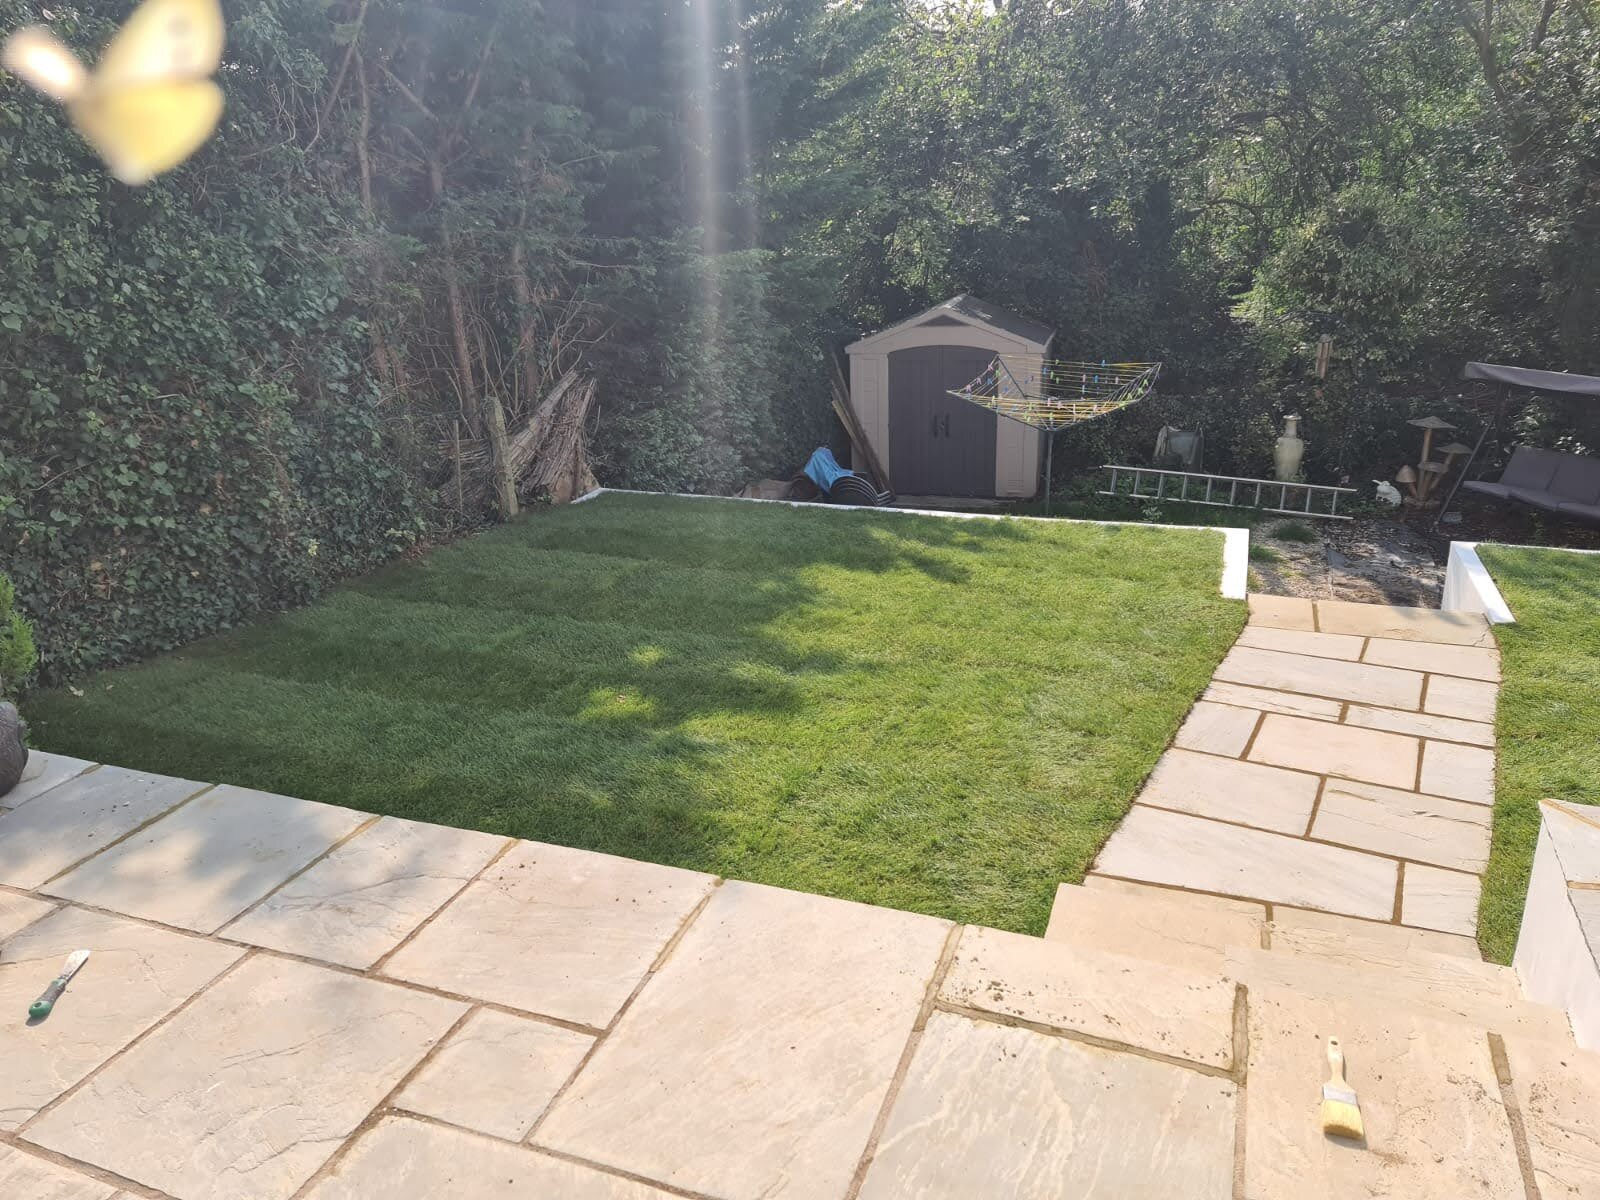 Mari's House And Garden - Natural Lawn - High Wycombe 4.jpg